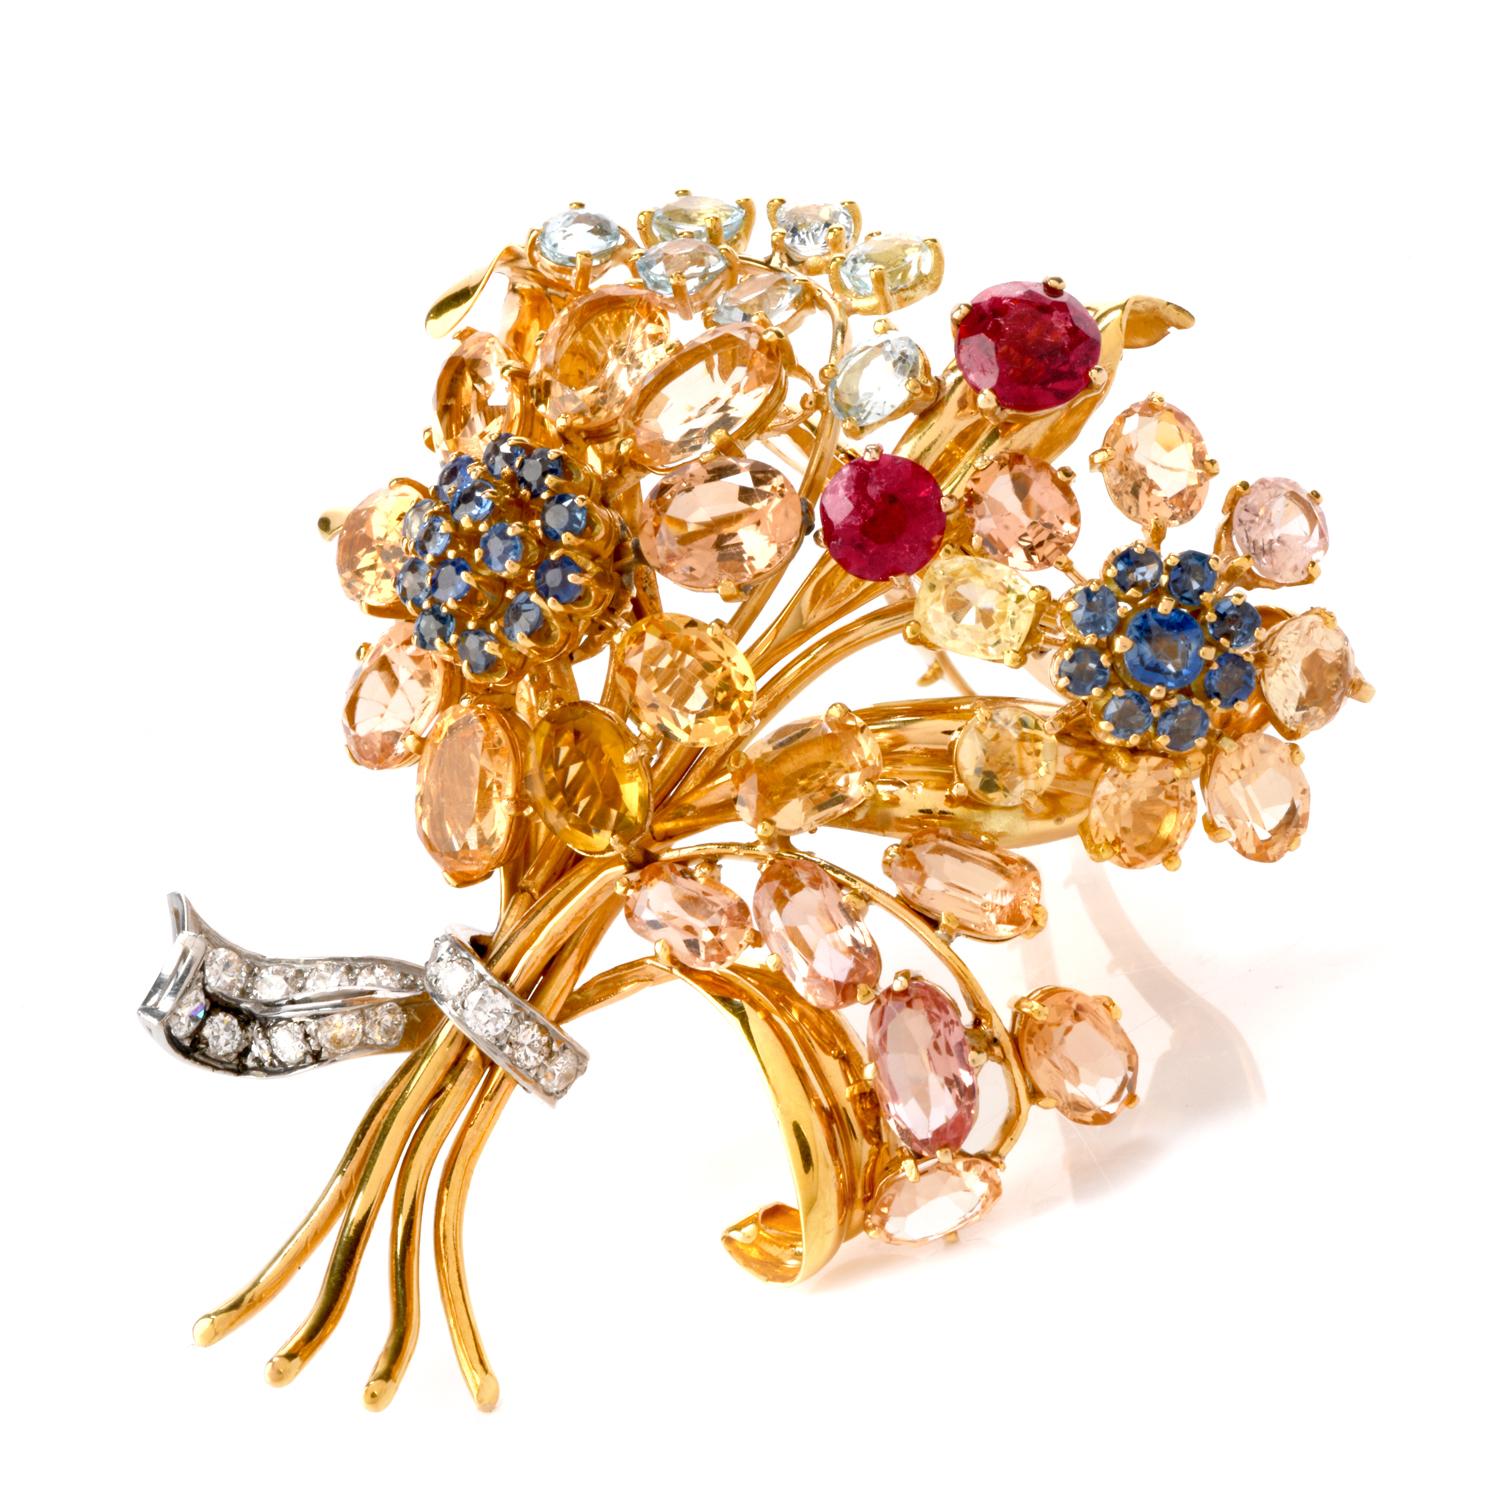 Summon spring into your life each day with this delightful Vintage Diamond & Multi Stone 18K Gold Flower Bouquet Clip

Summon Fall into your daily life with this delightful Vintage retro Diamond & Multi-color sapphire 18K Gold Flower Bouquet